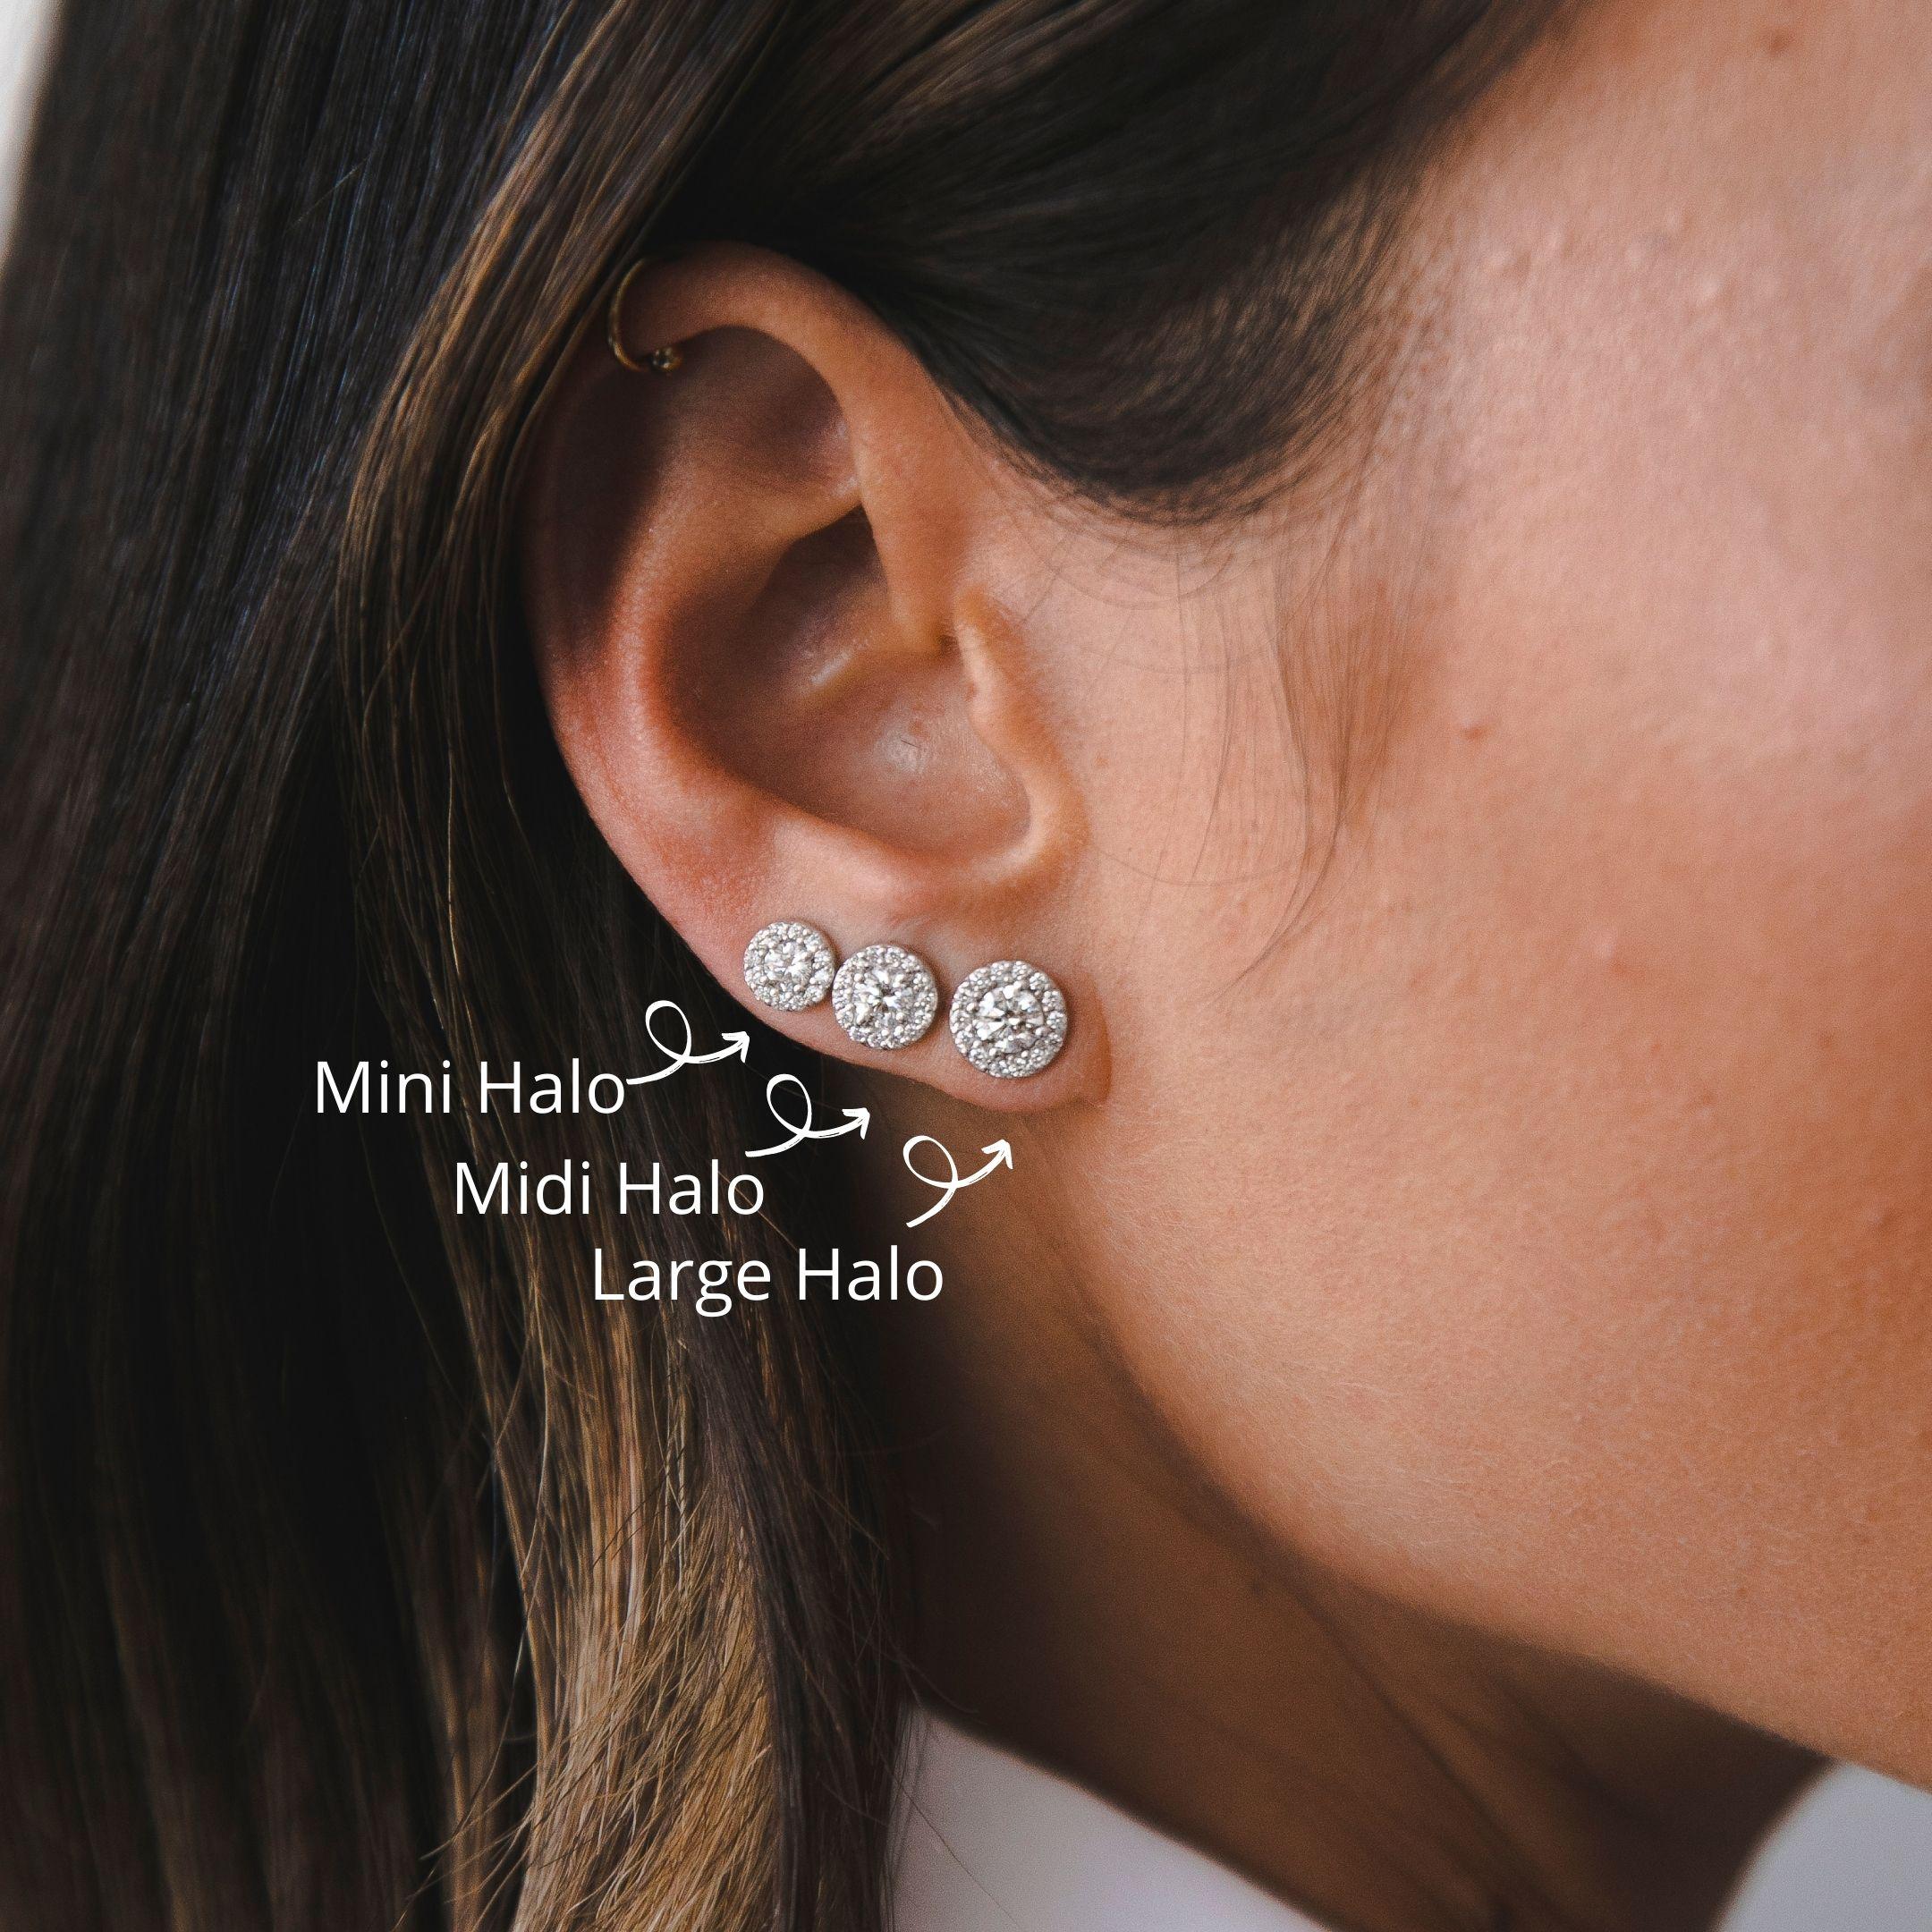 0.68 Carat Diamond Midi Halo Earrings in 14 Karat White Gold - Shlomit Rogel

A beautiful and classic halo design, these midi stud earrings feature shiny genuine diamonds totaling 0.68 Carat. Timeless and chic, these earrings will compliment any